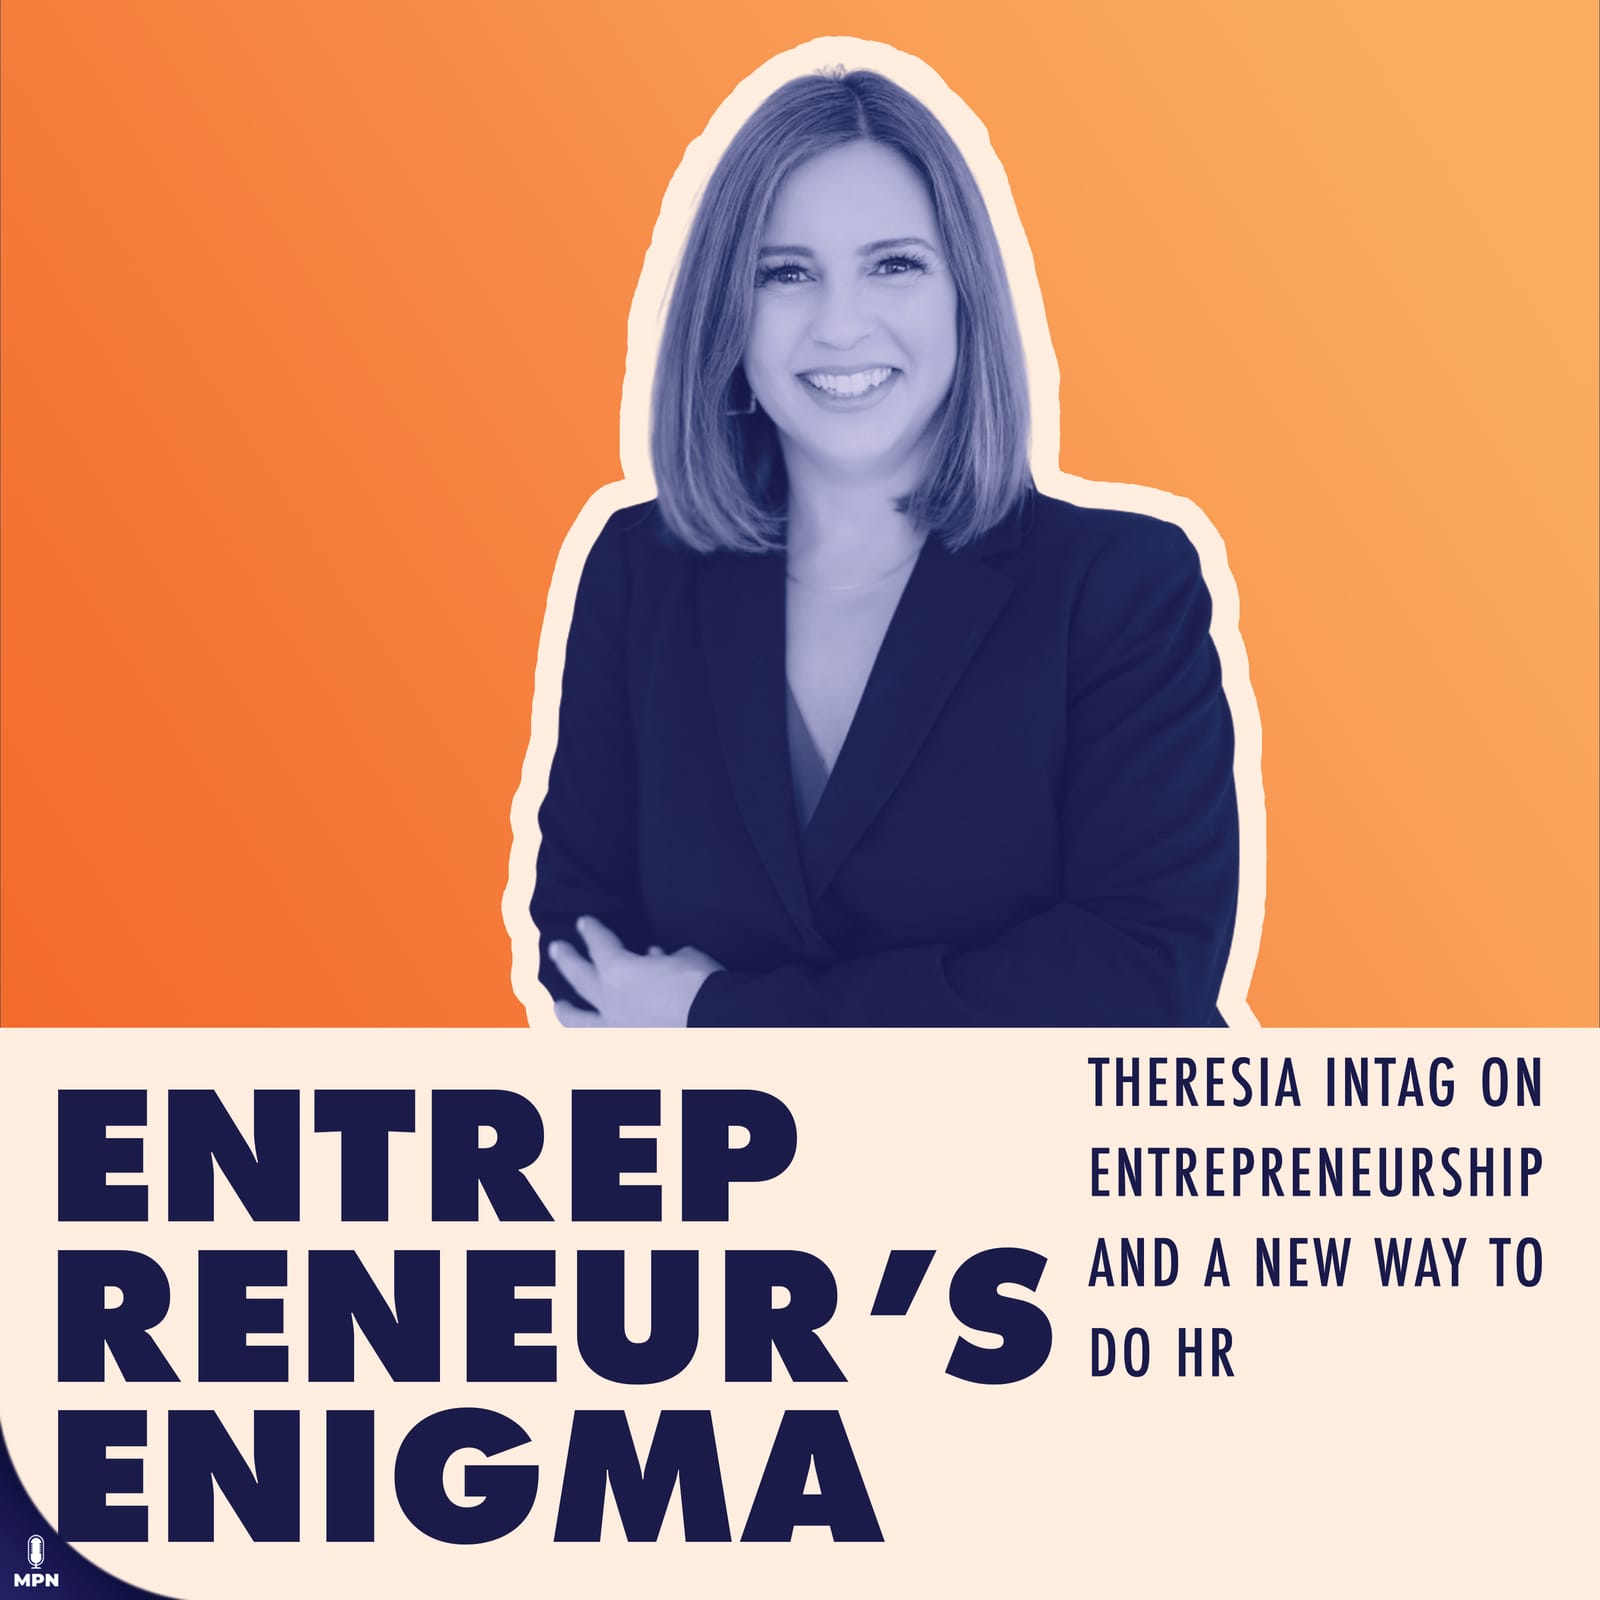 Entrepreneur's Enigma album art. Says Entrepreneur's Enigma and Theresia Intag on entrepreneurship and a new way to to do HR